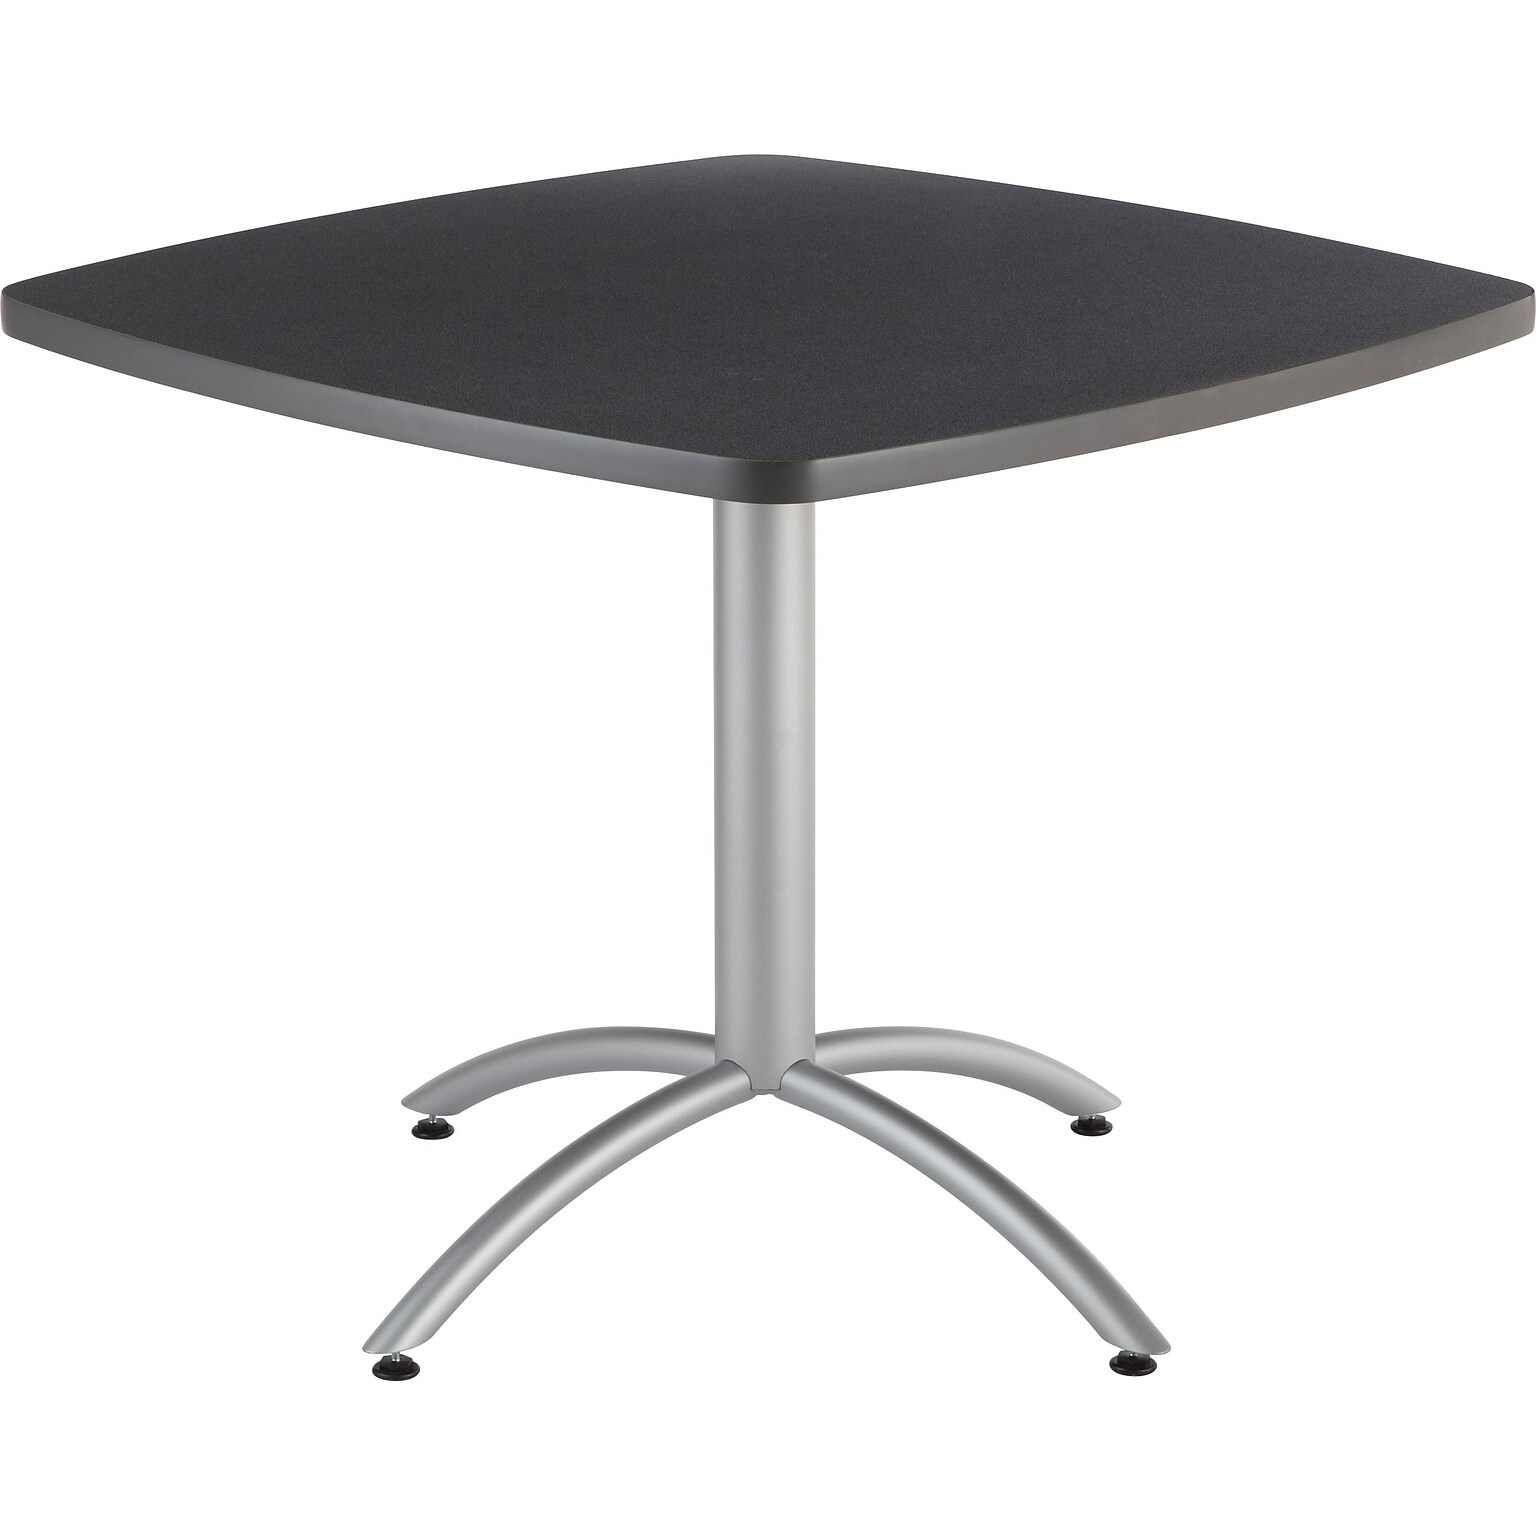 Iceberg CafeWorks 36 Square Cafe Table, Graphite/Silver, 30H x 36W x 36D